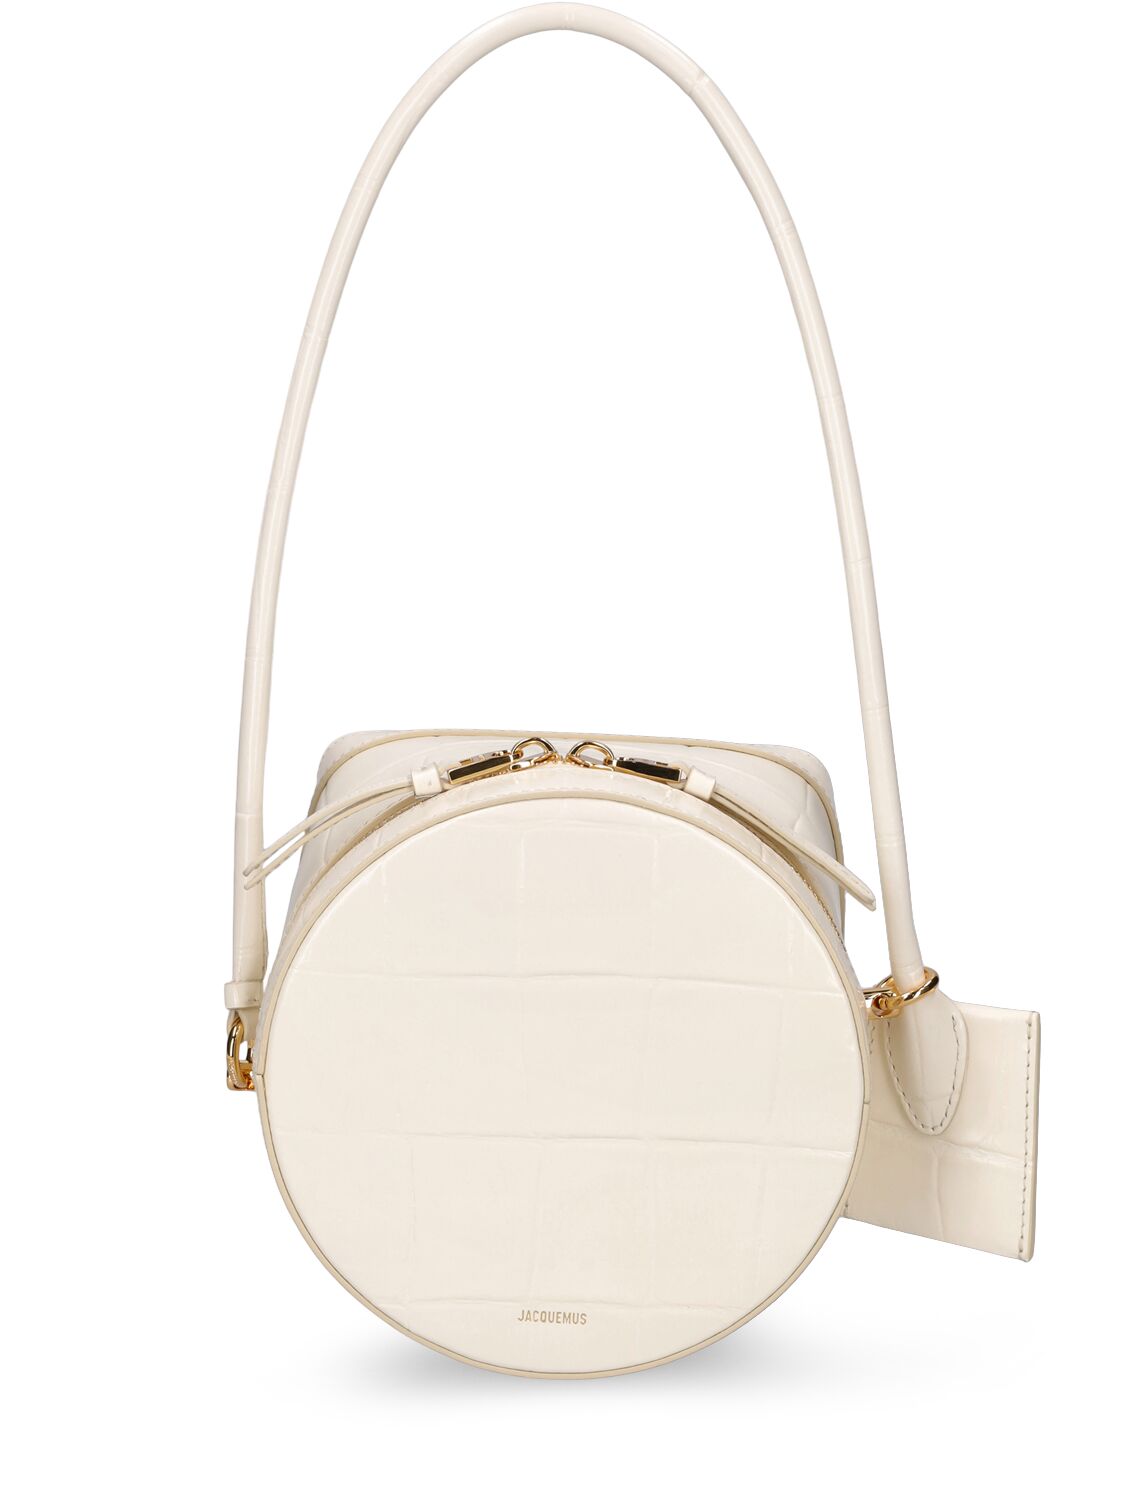 Jacquemus Le Vanito Croc Embossed Leather Bag In Light Ivory